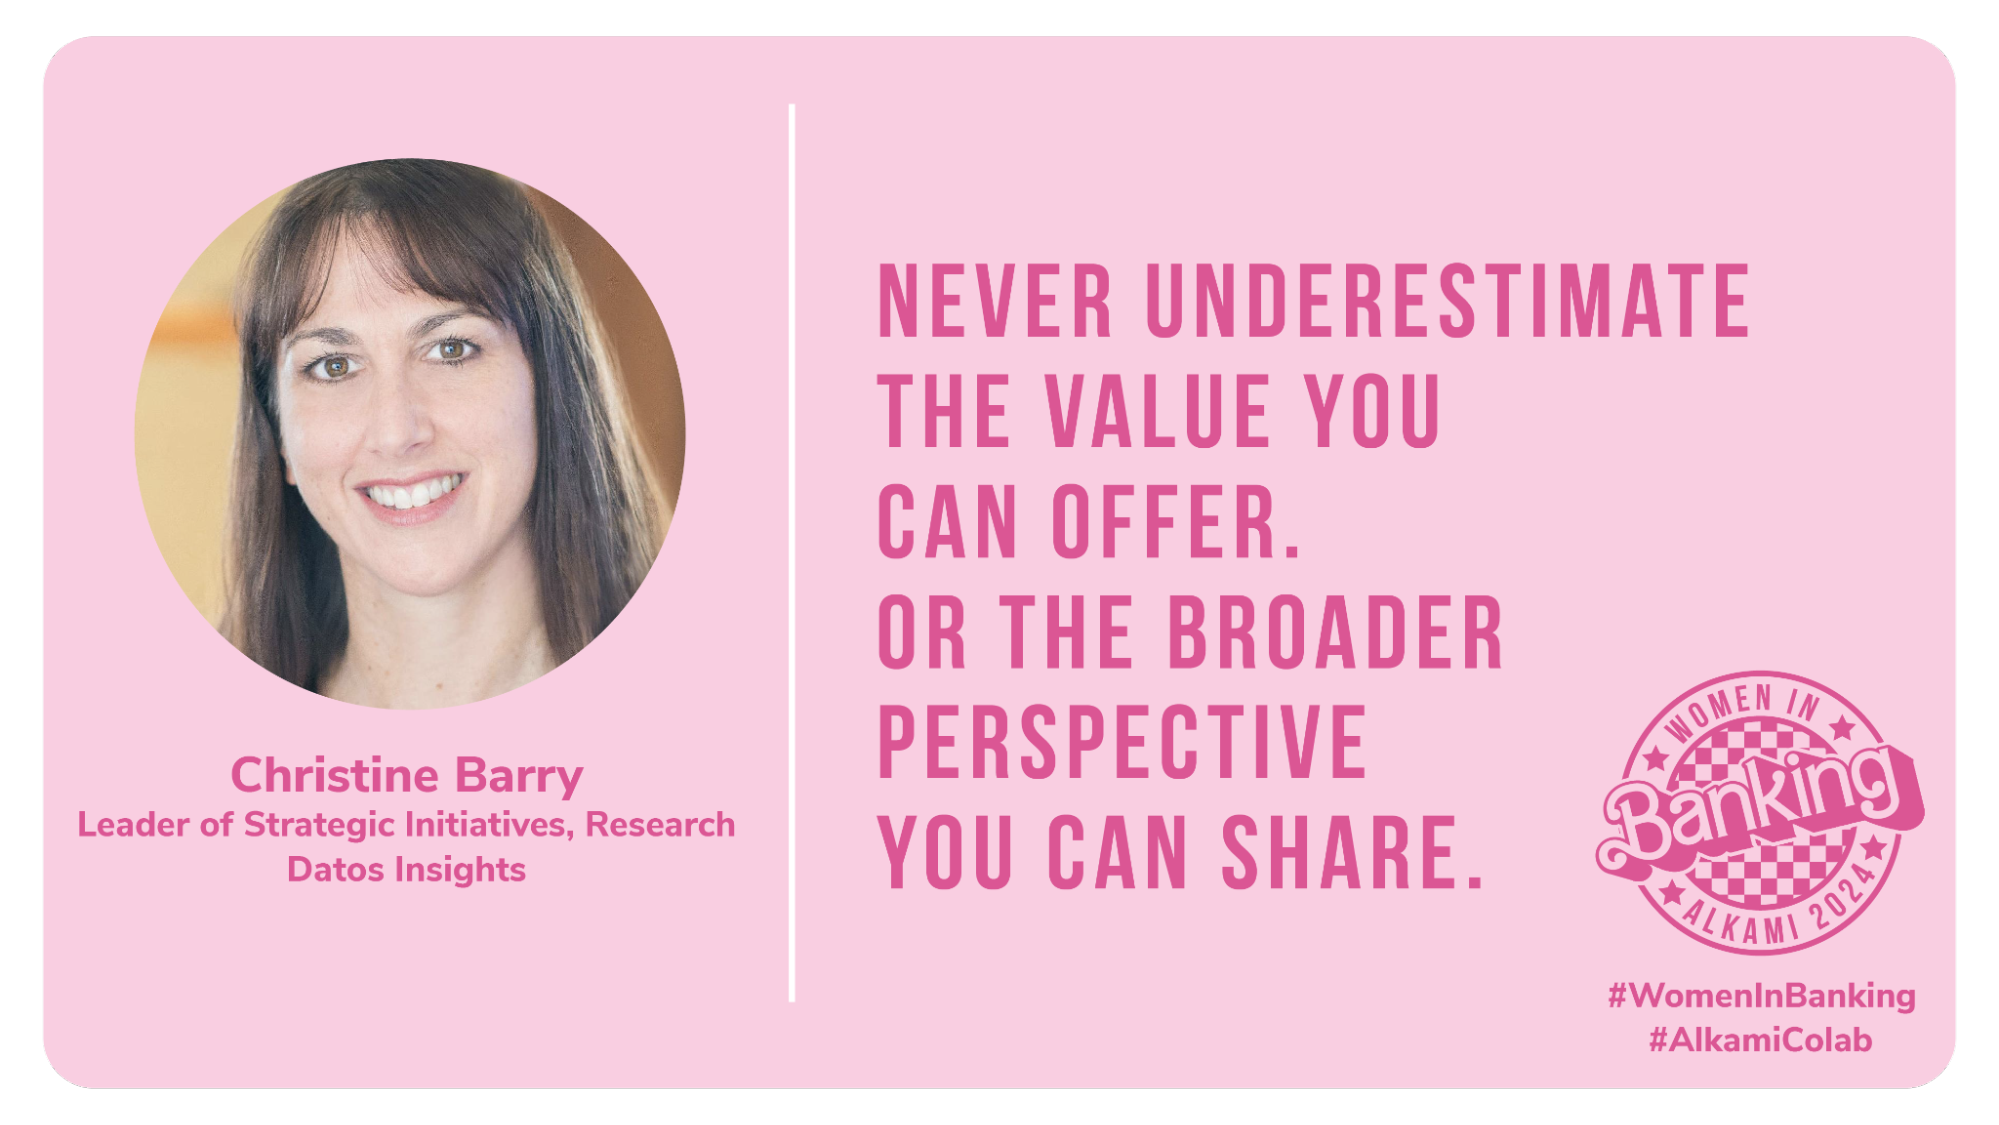 Christine Barry | Leader of Strategic Initiatives, Research | Datos Insights  